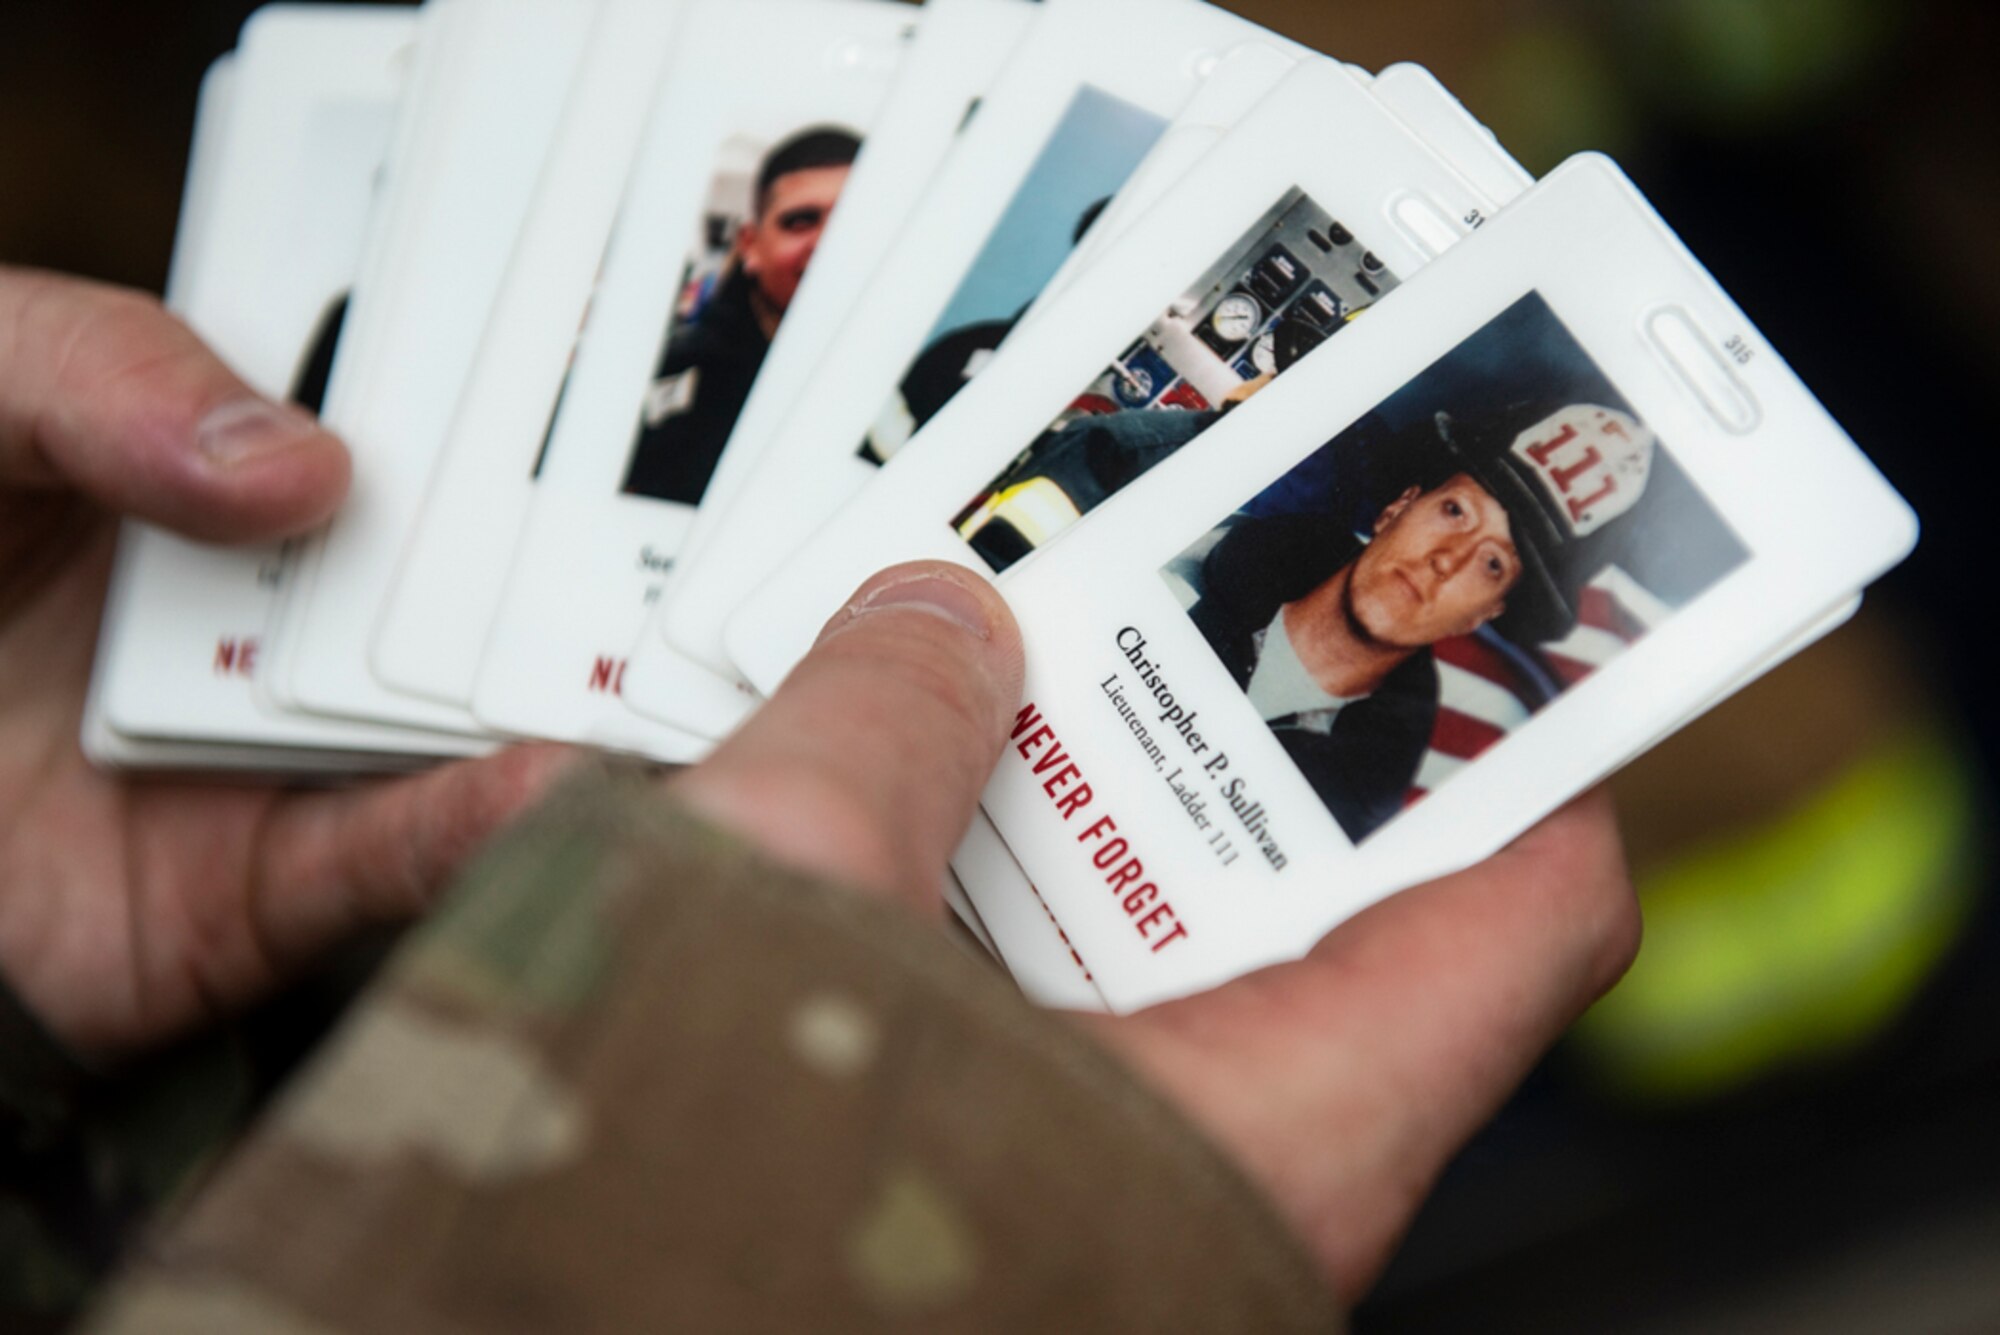 Participants carried one of these cards during each of their stair climbs to honor a first responder during a 20th Anniversary 9/11 Remembrance Ceremony at Osan Air Base, Republic of Korea, Sept. 11, 2021.